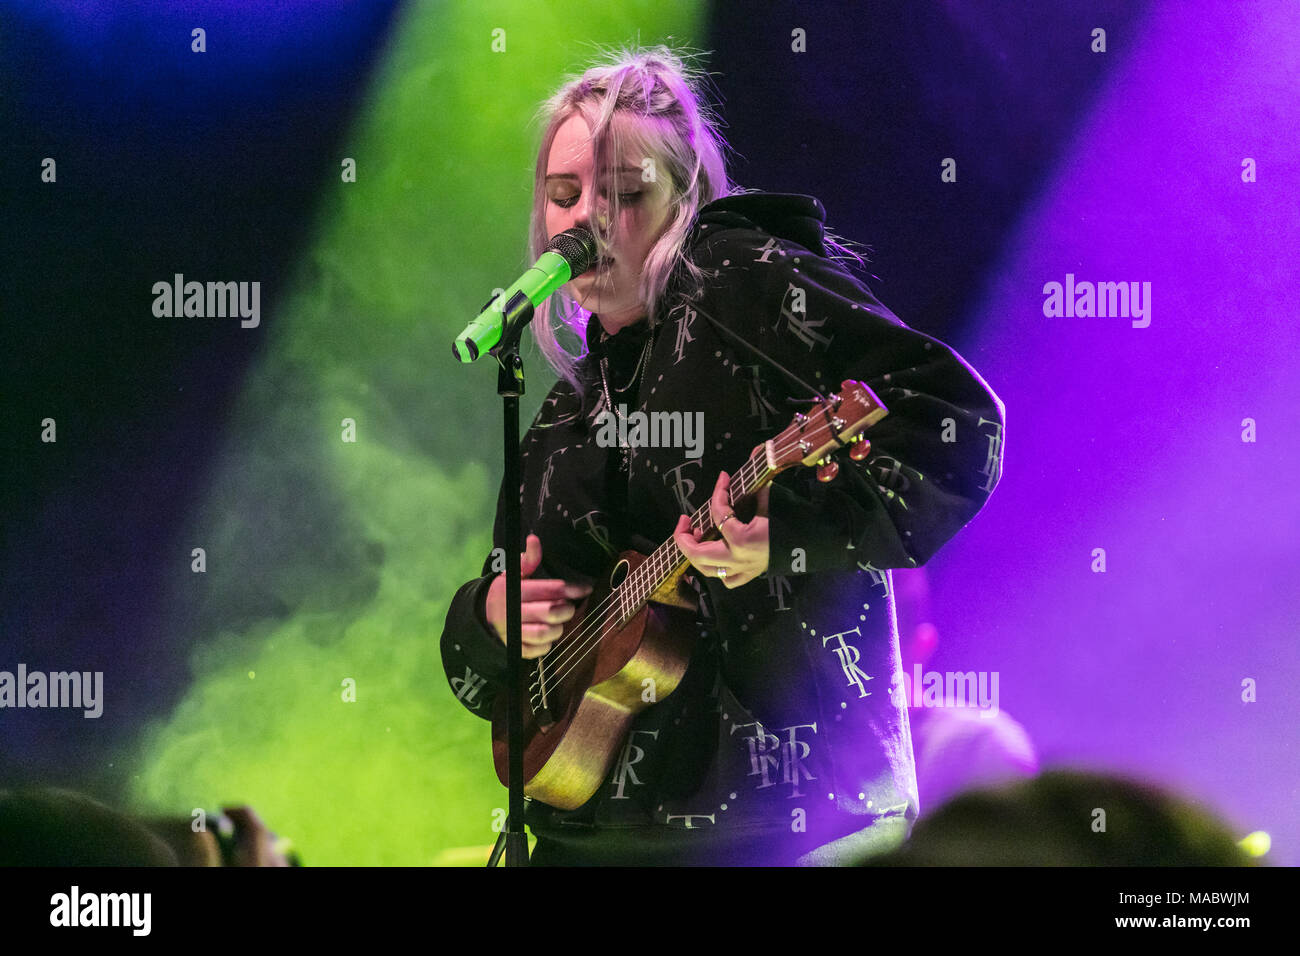 Norway, Oslo - March 1, 2018. The American singer and songwriter Billie Eilish performs a live concert at Sentrum Scene during the Norwegian showcase festival and music conference By Larm 2018 in Oslo. (Photo credit: Gonzales Photo - Stian S. Moller). Stock Photo